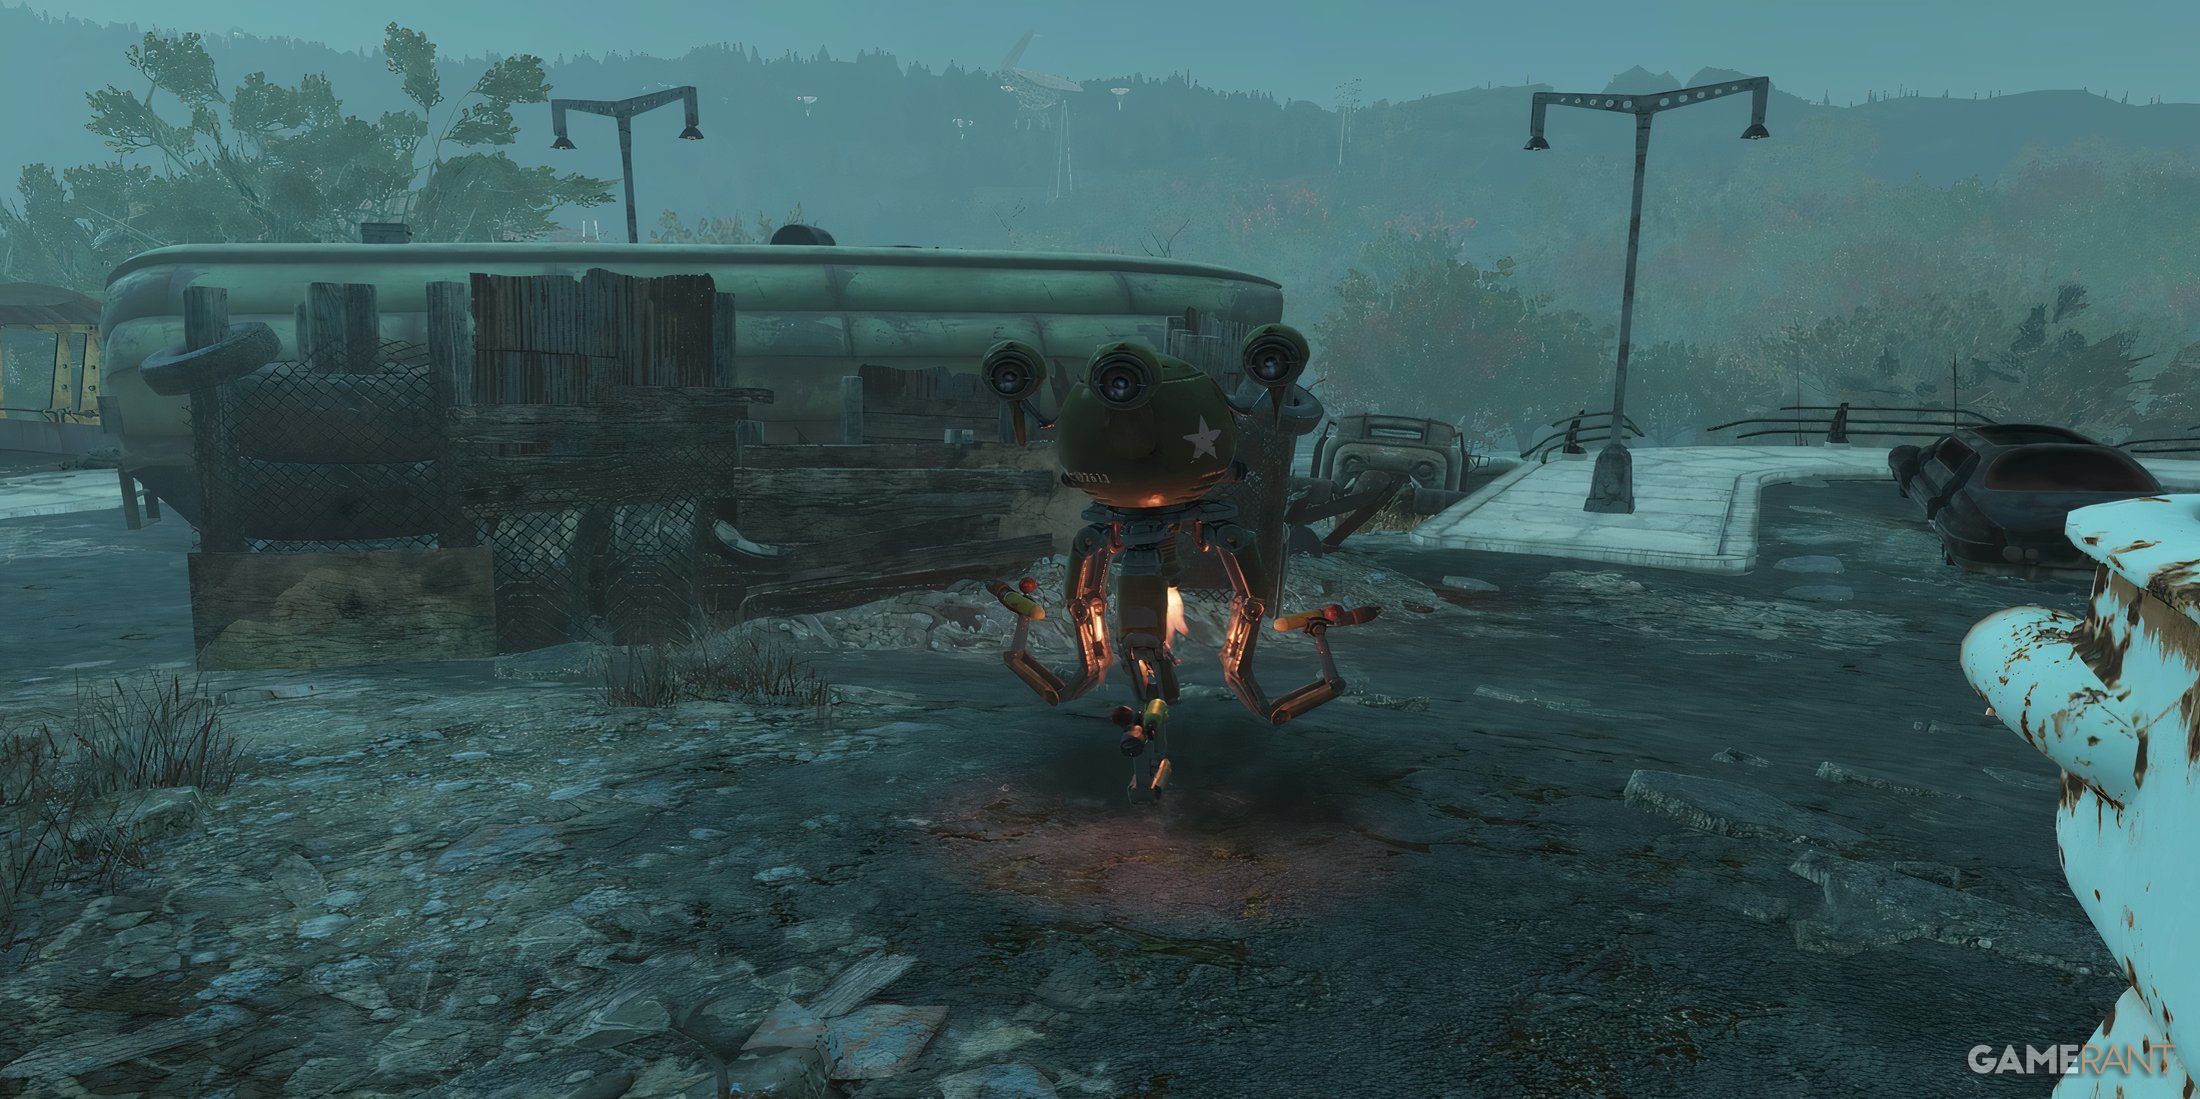 A Mr Gutsy Robot in Fallout 76